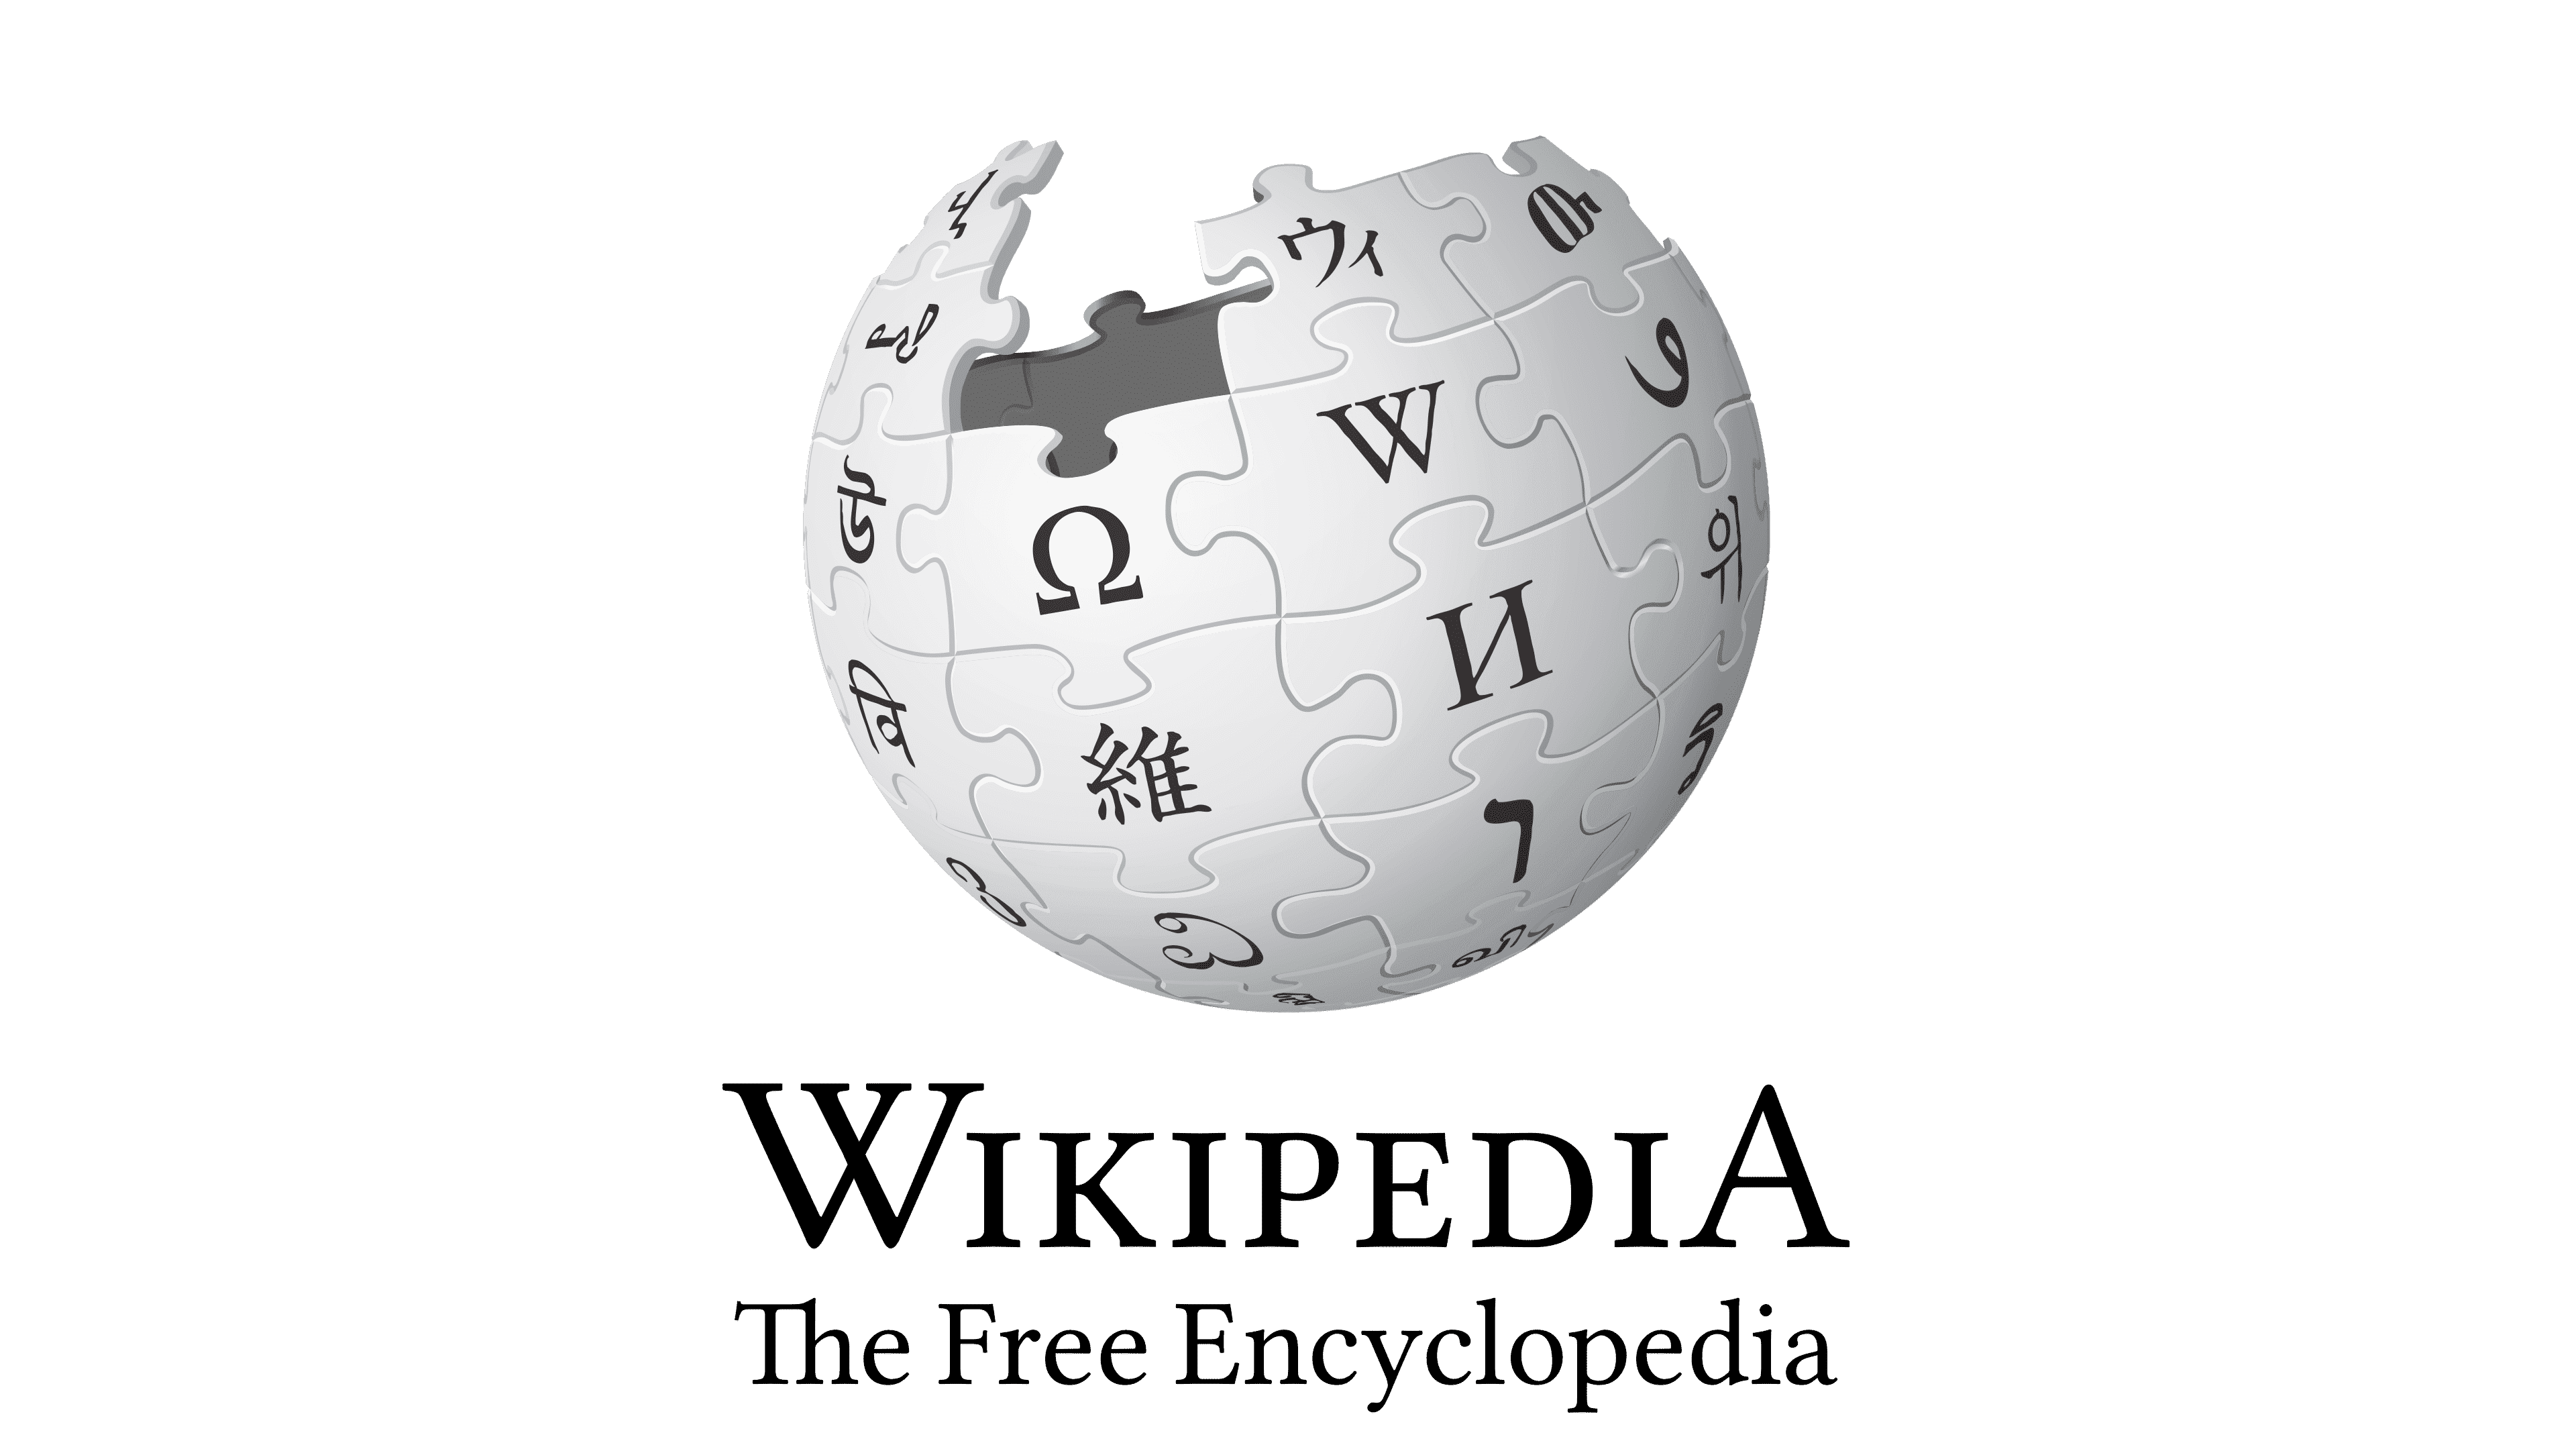 Writing on Wikipedia for Brand: Making an Eternal Effect!